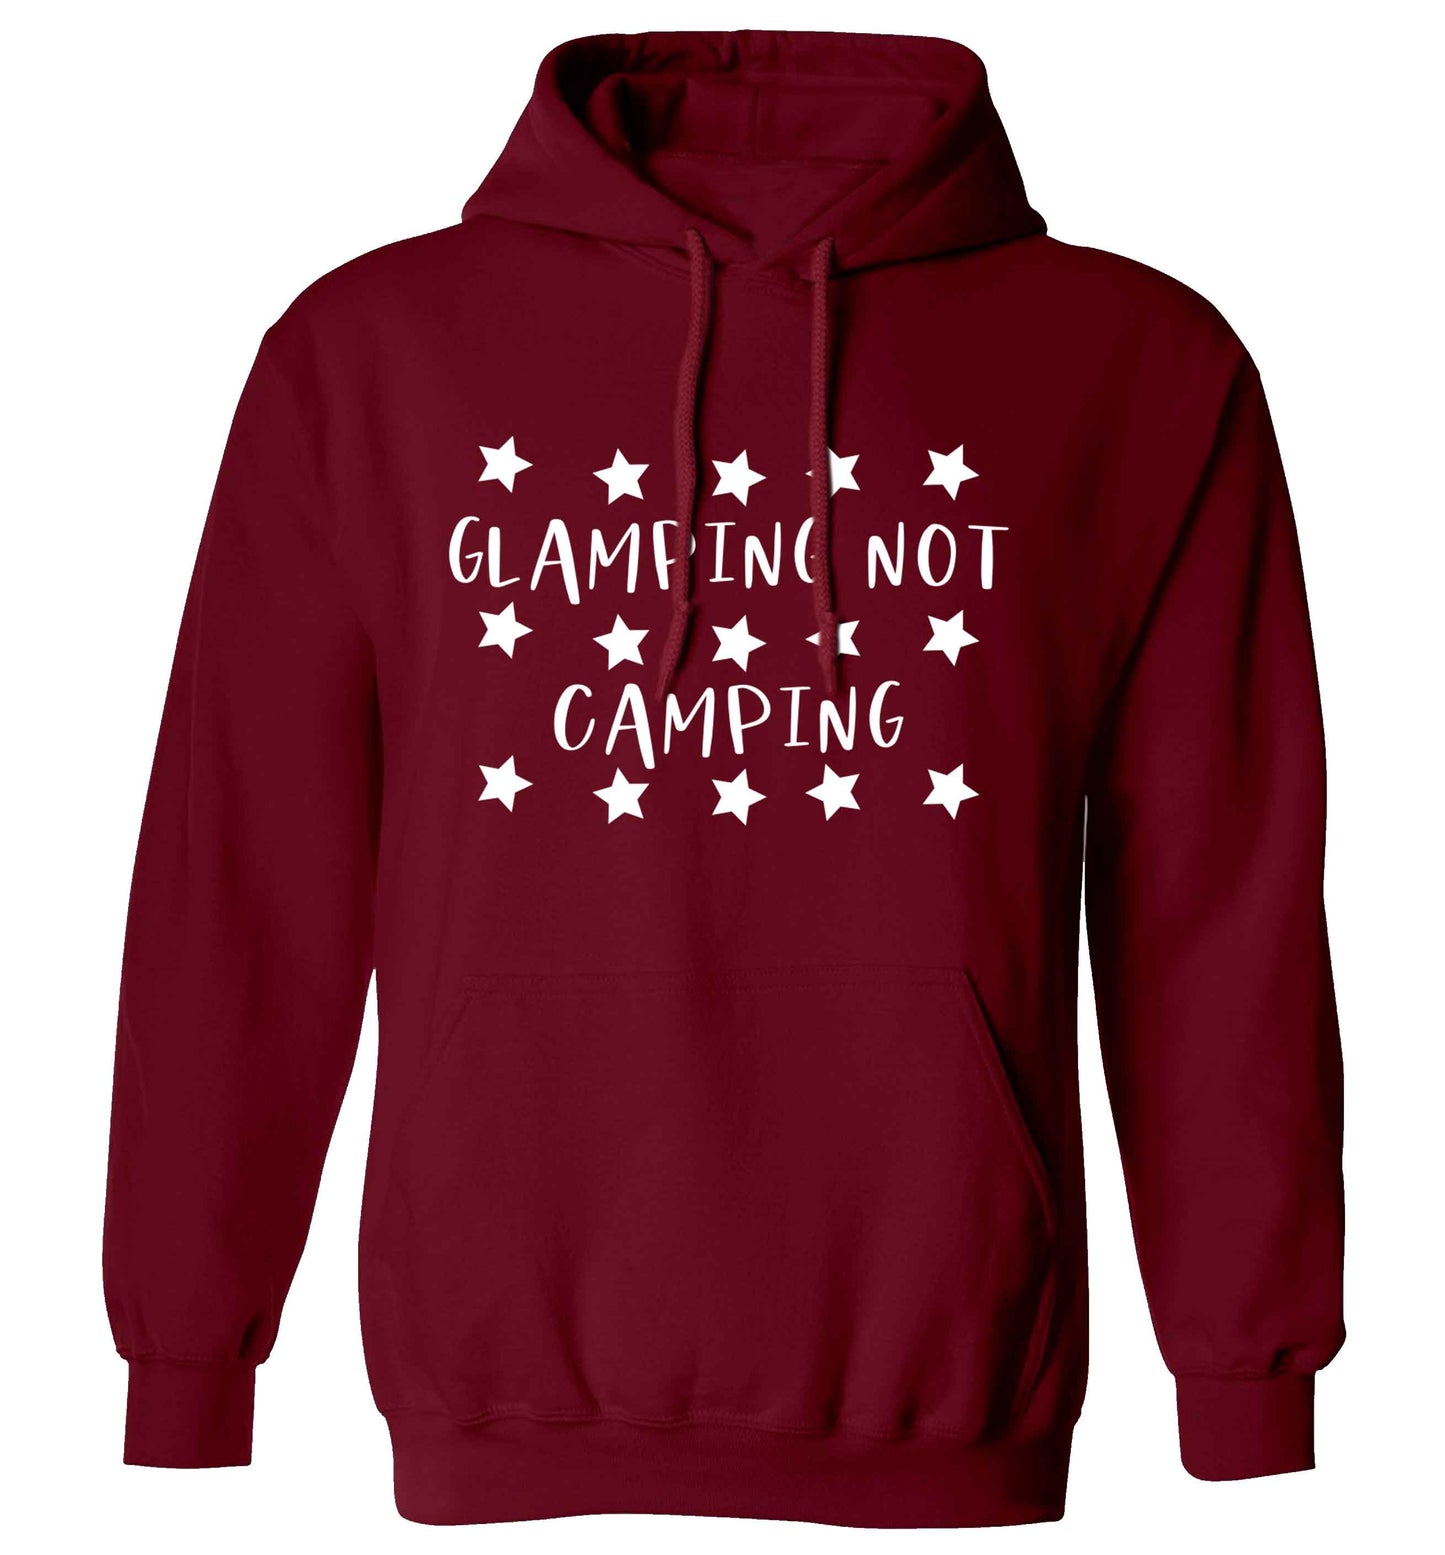 Glamping not camping adults unisex maroon hoodie 2XL